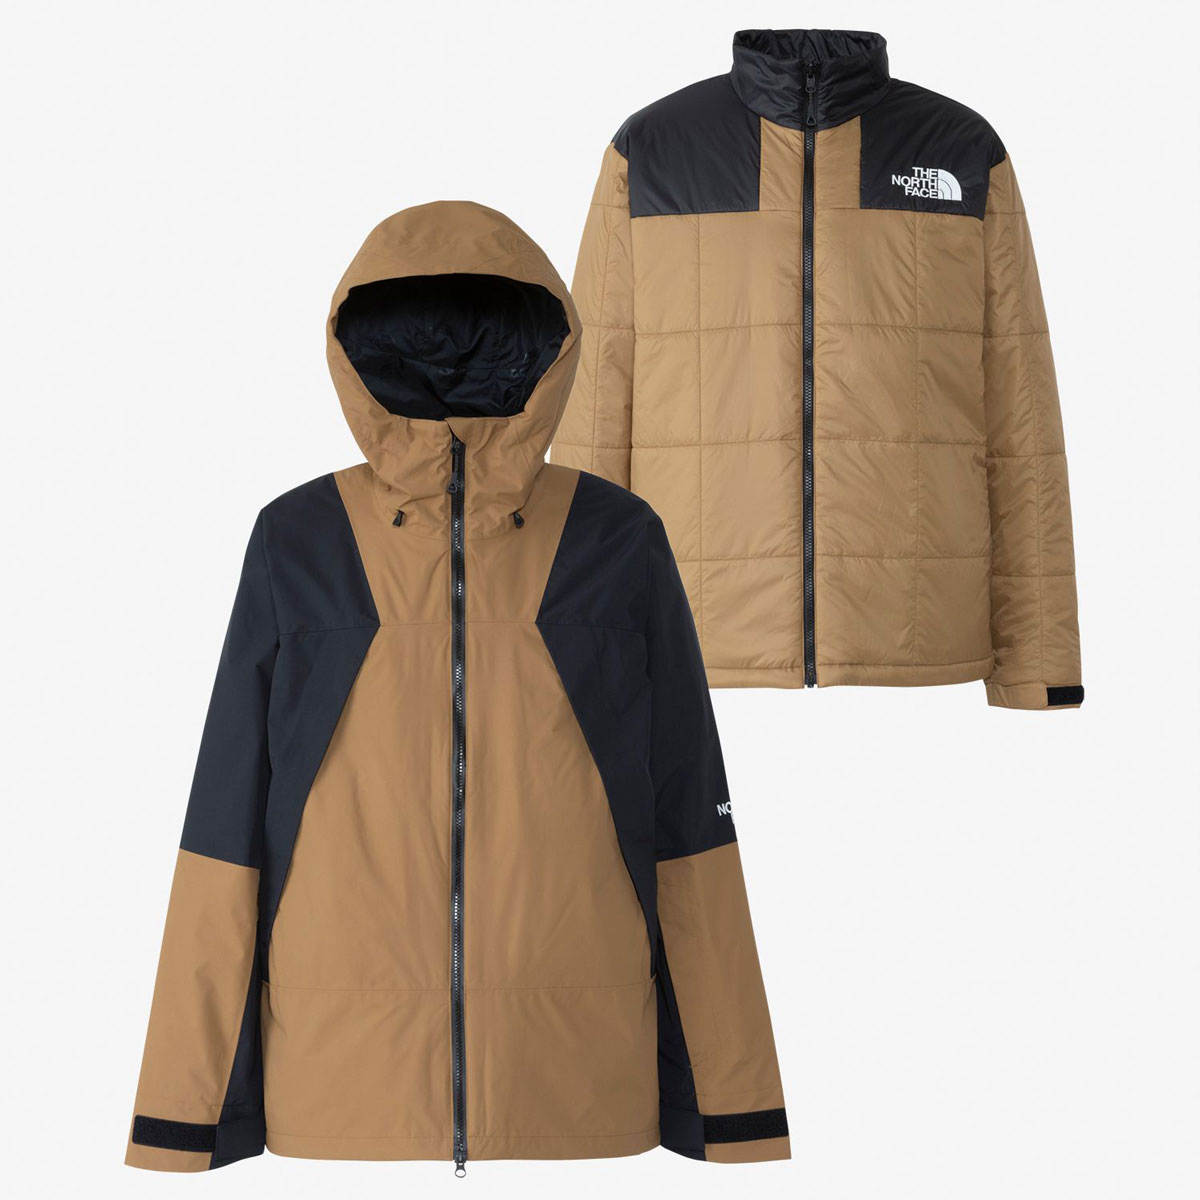 【THE NORTH FACE】(ノースフェイス) Snowbird Triclimate Jacket 